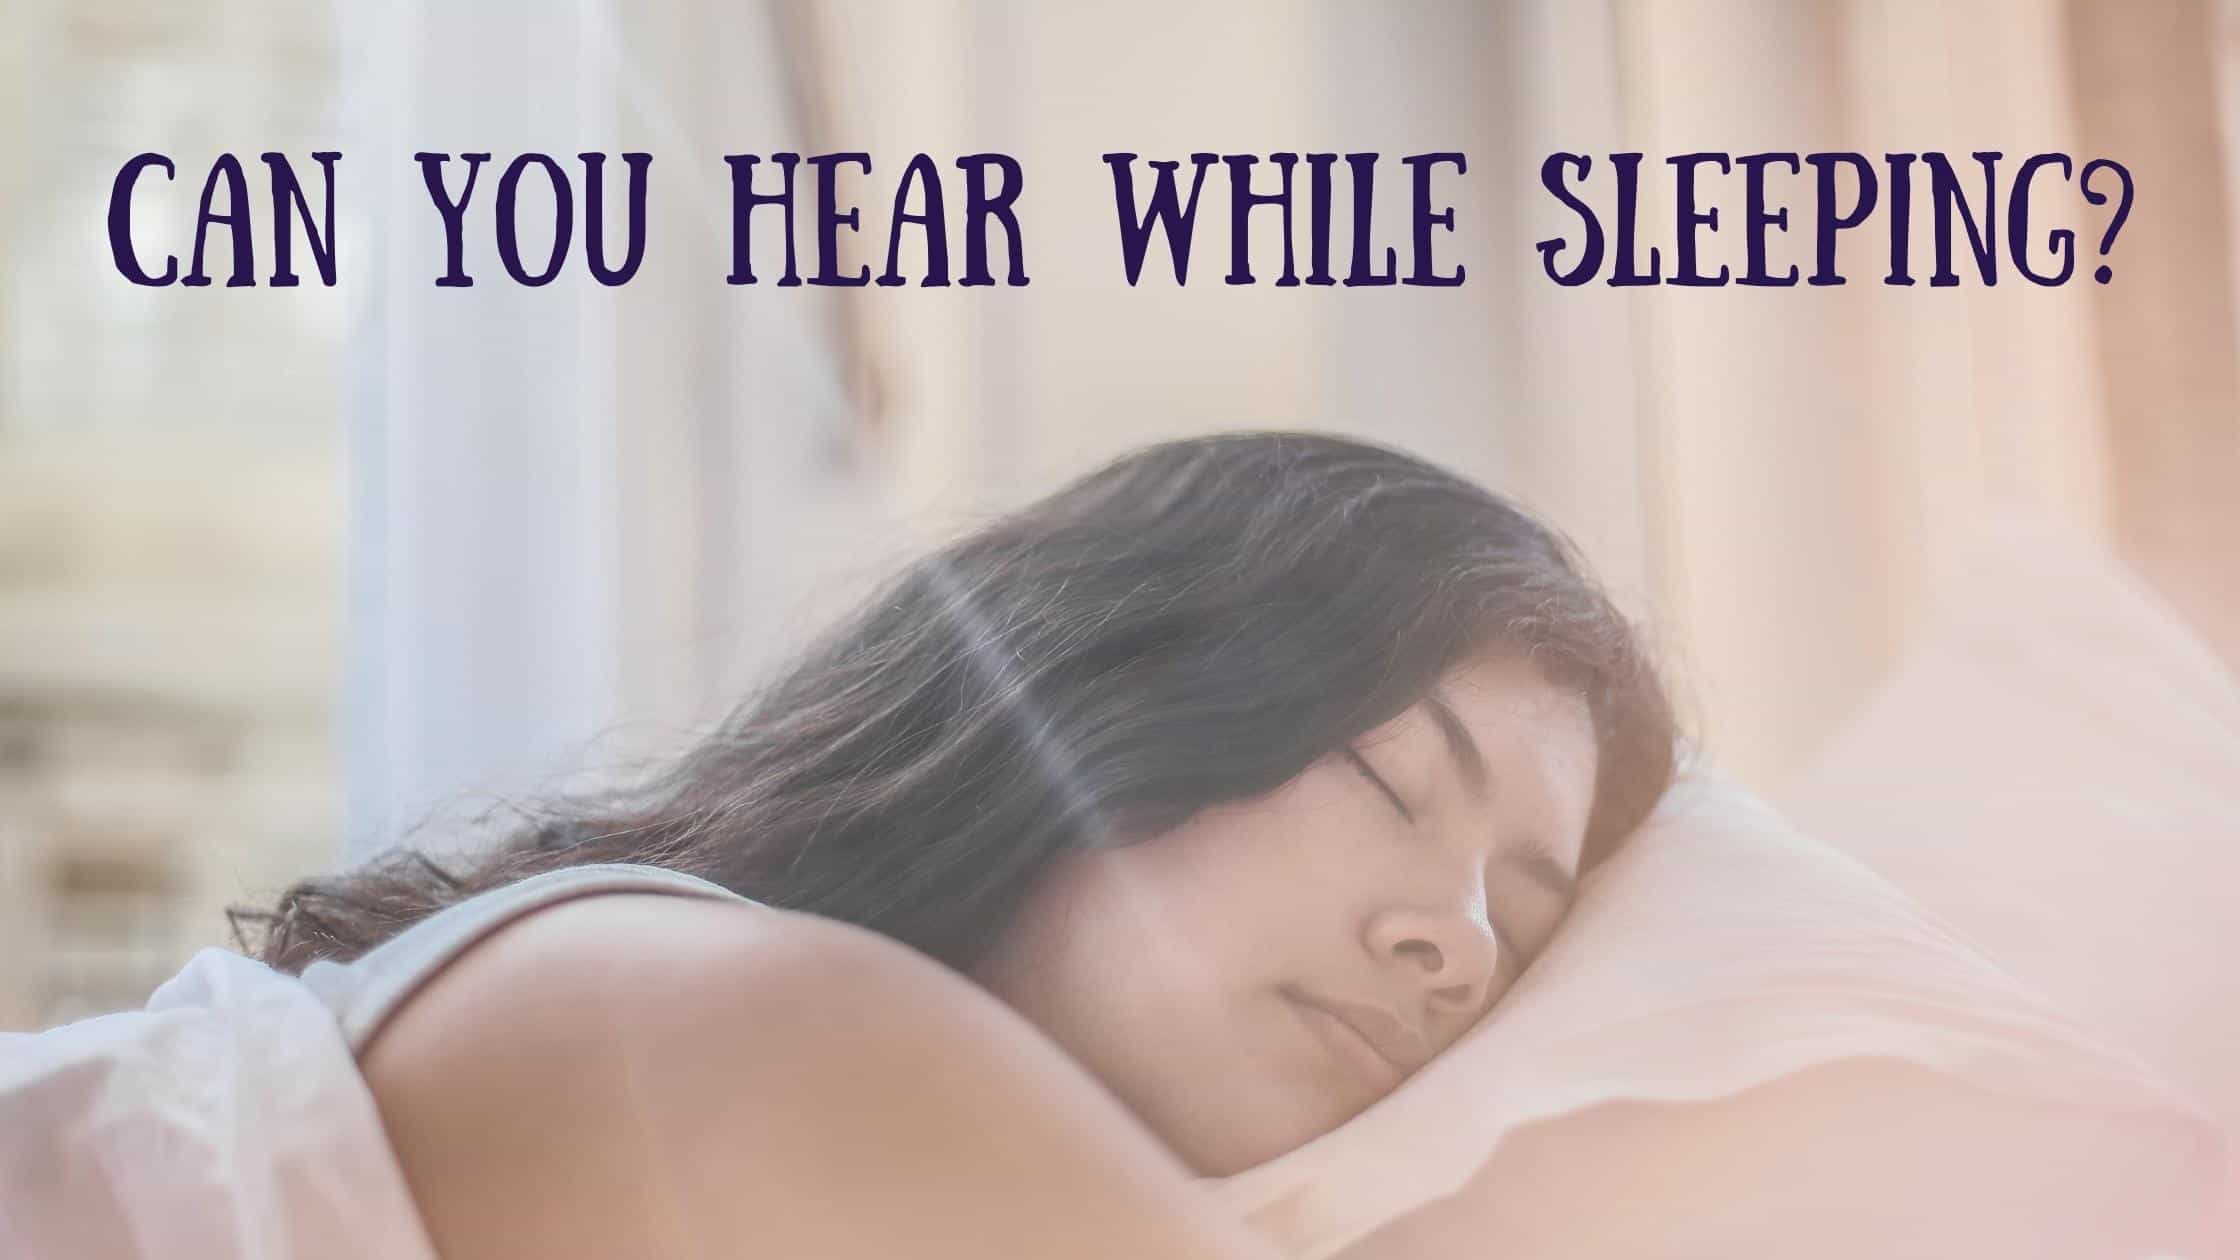 Featured image for “Can You Hear While Sleeping?”